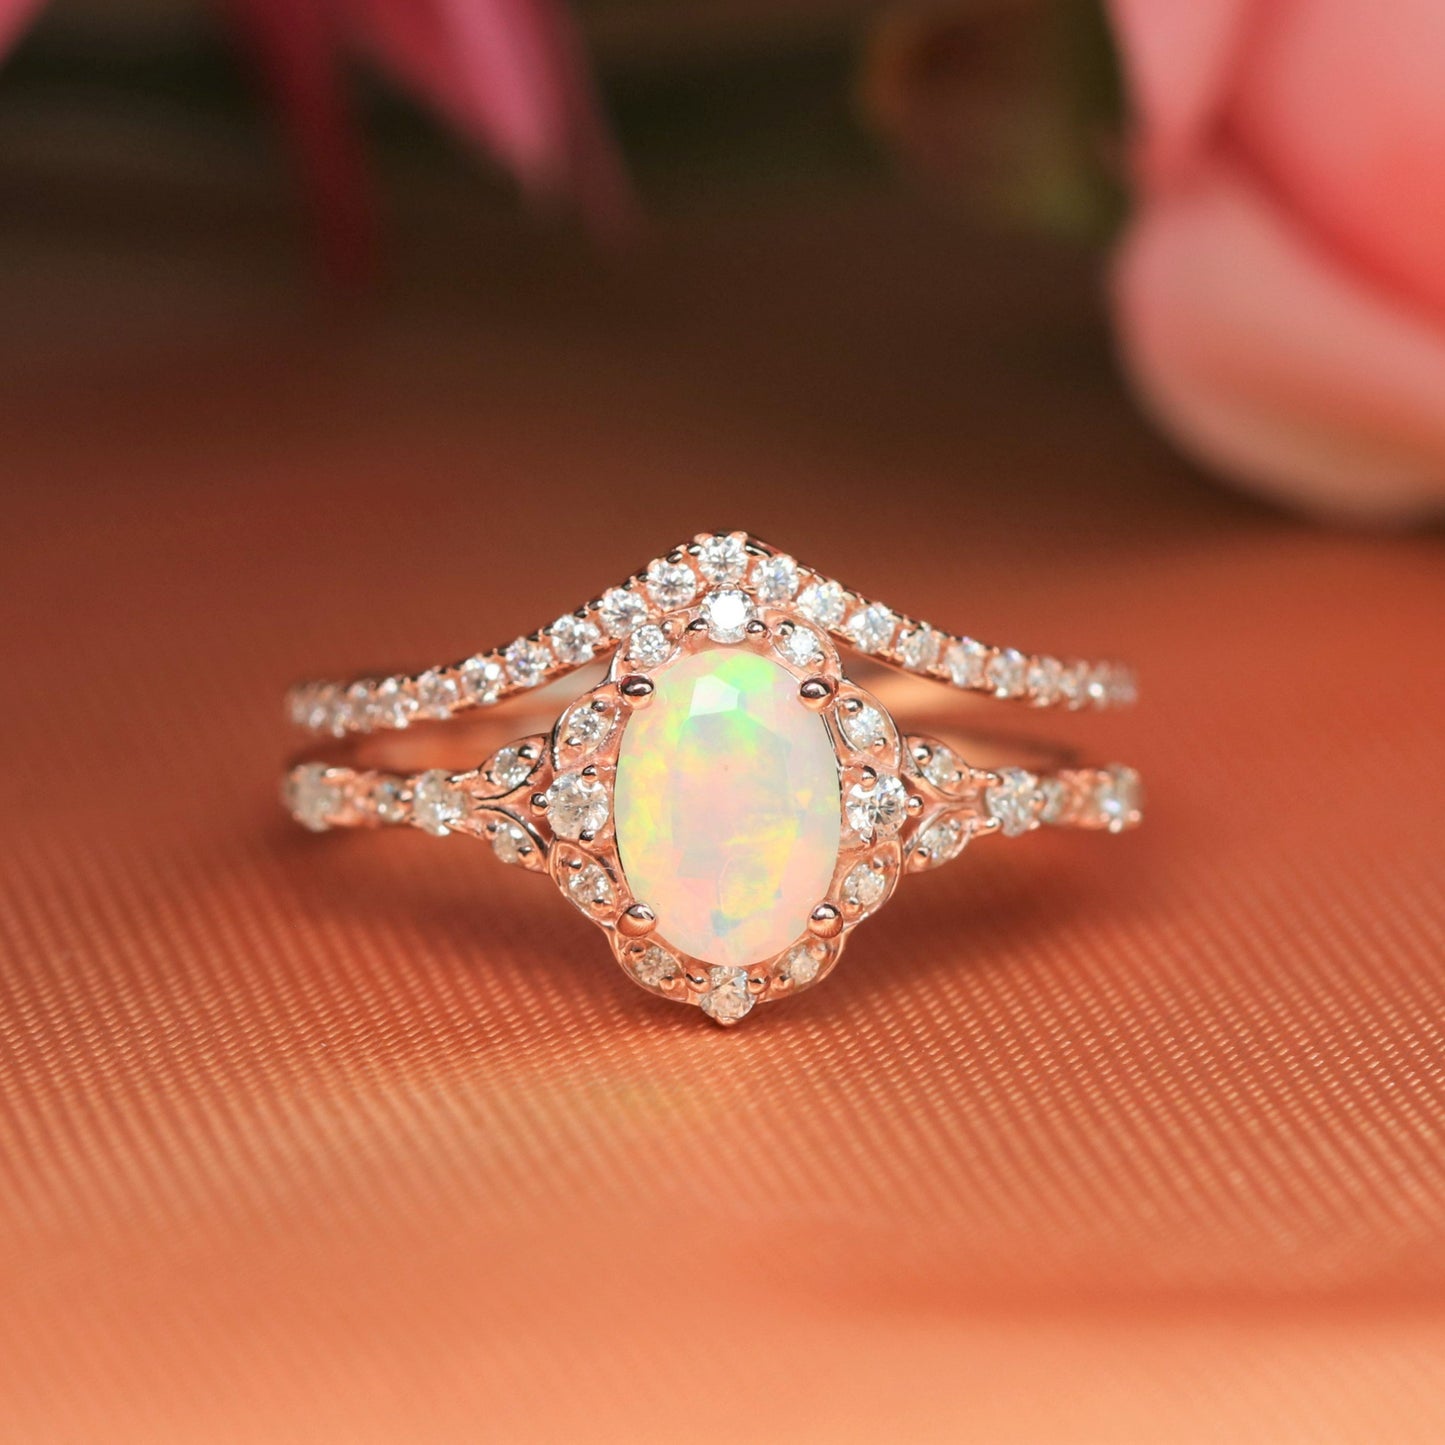 1.65 carat Oval cut Opal Bridal curved Wedding Ring Set with Diamond on Rose Gold